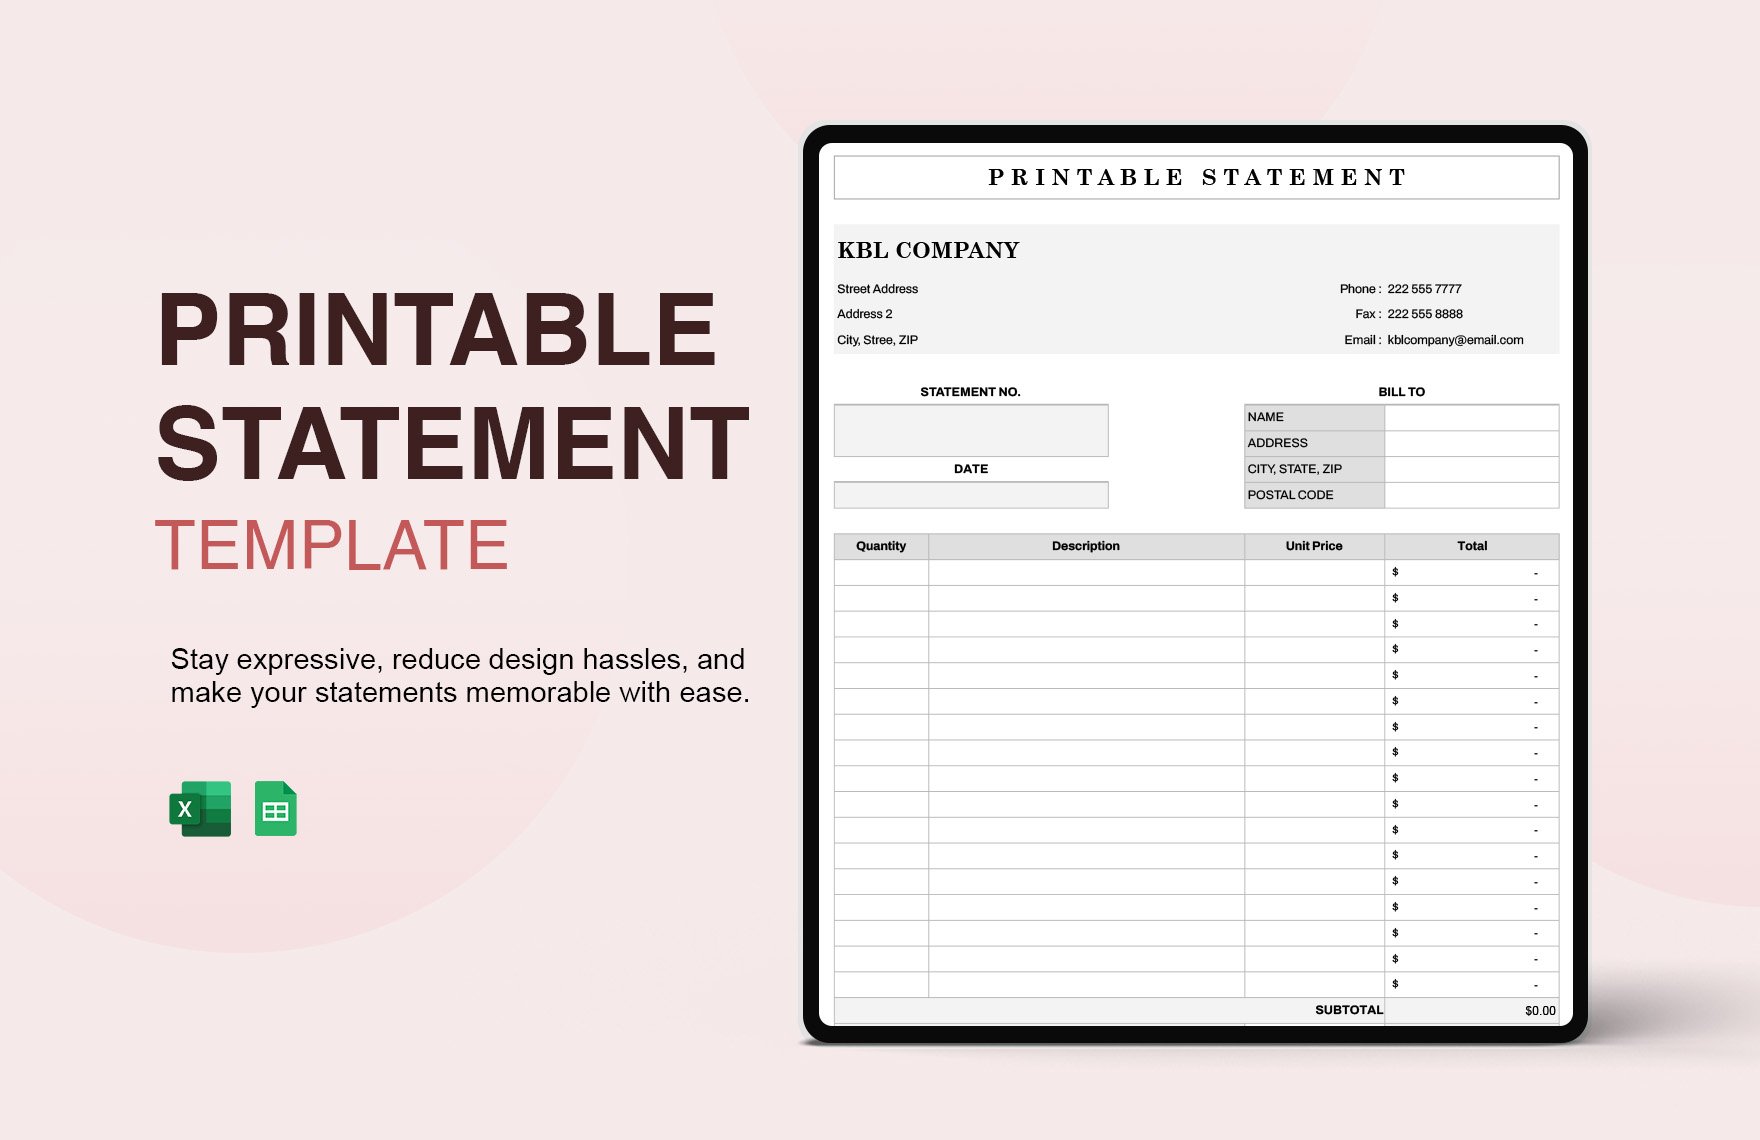 Free Printable Statement Template in Excel, Google Sheets